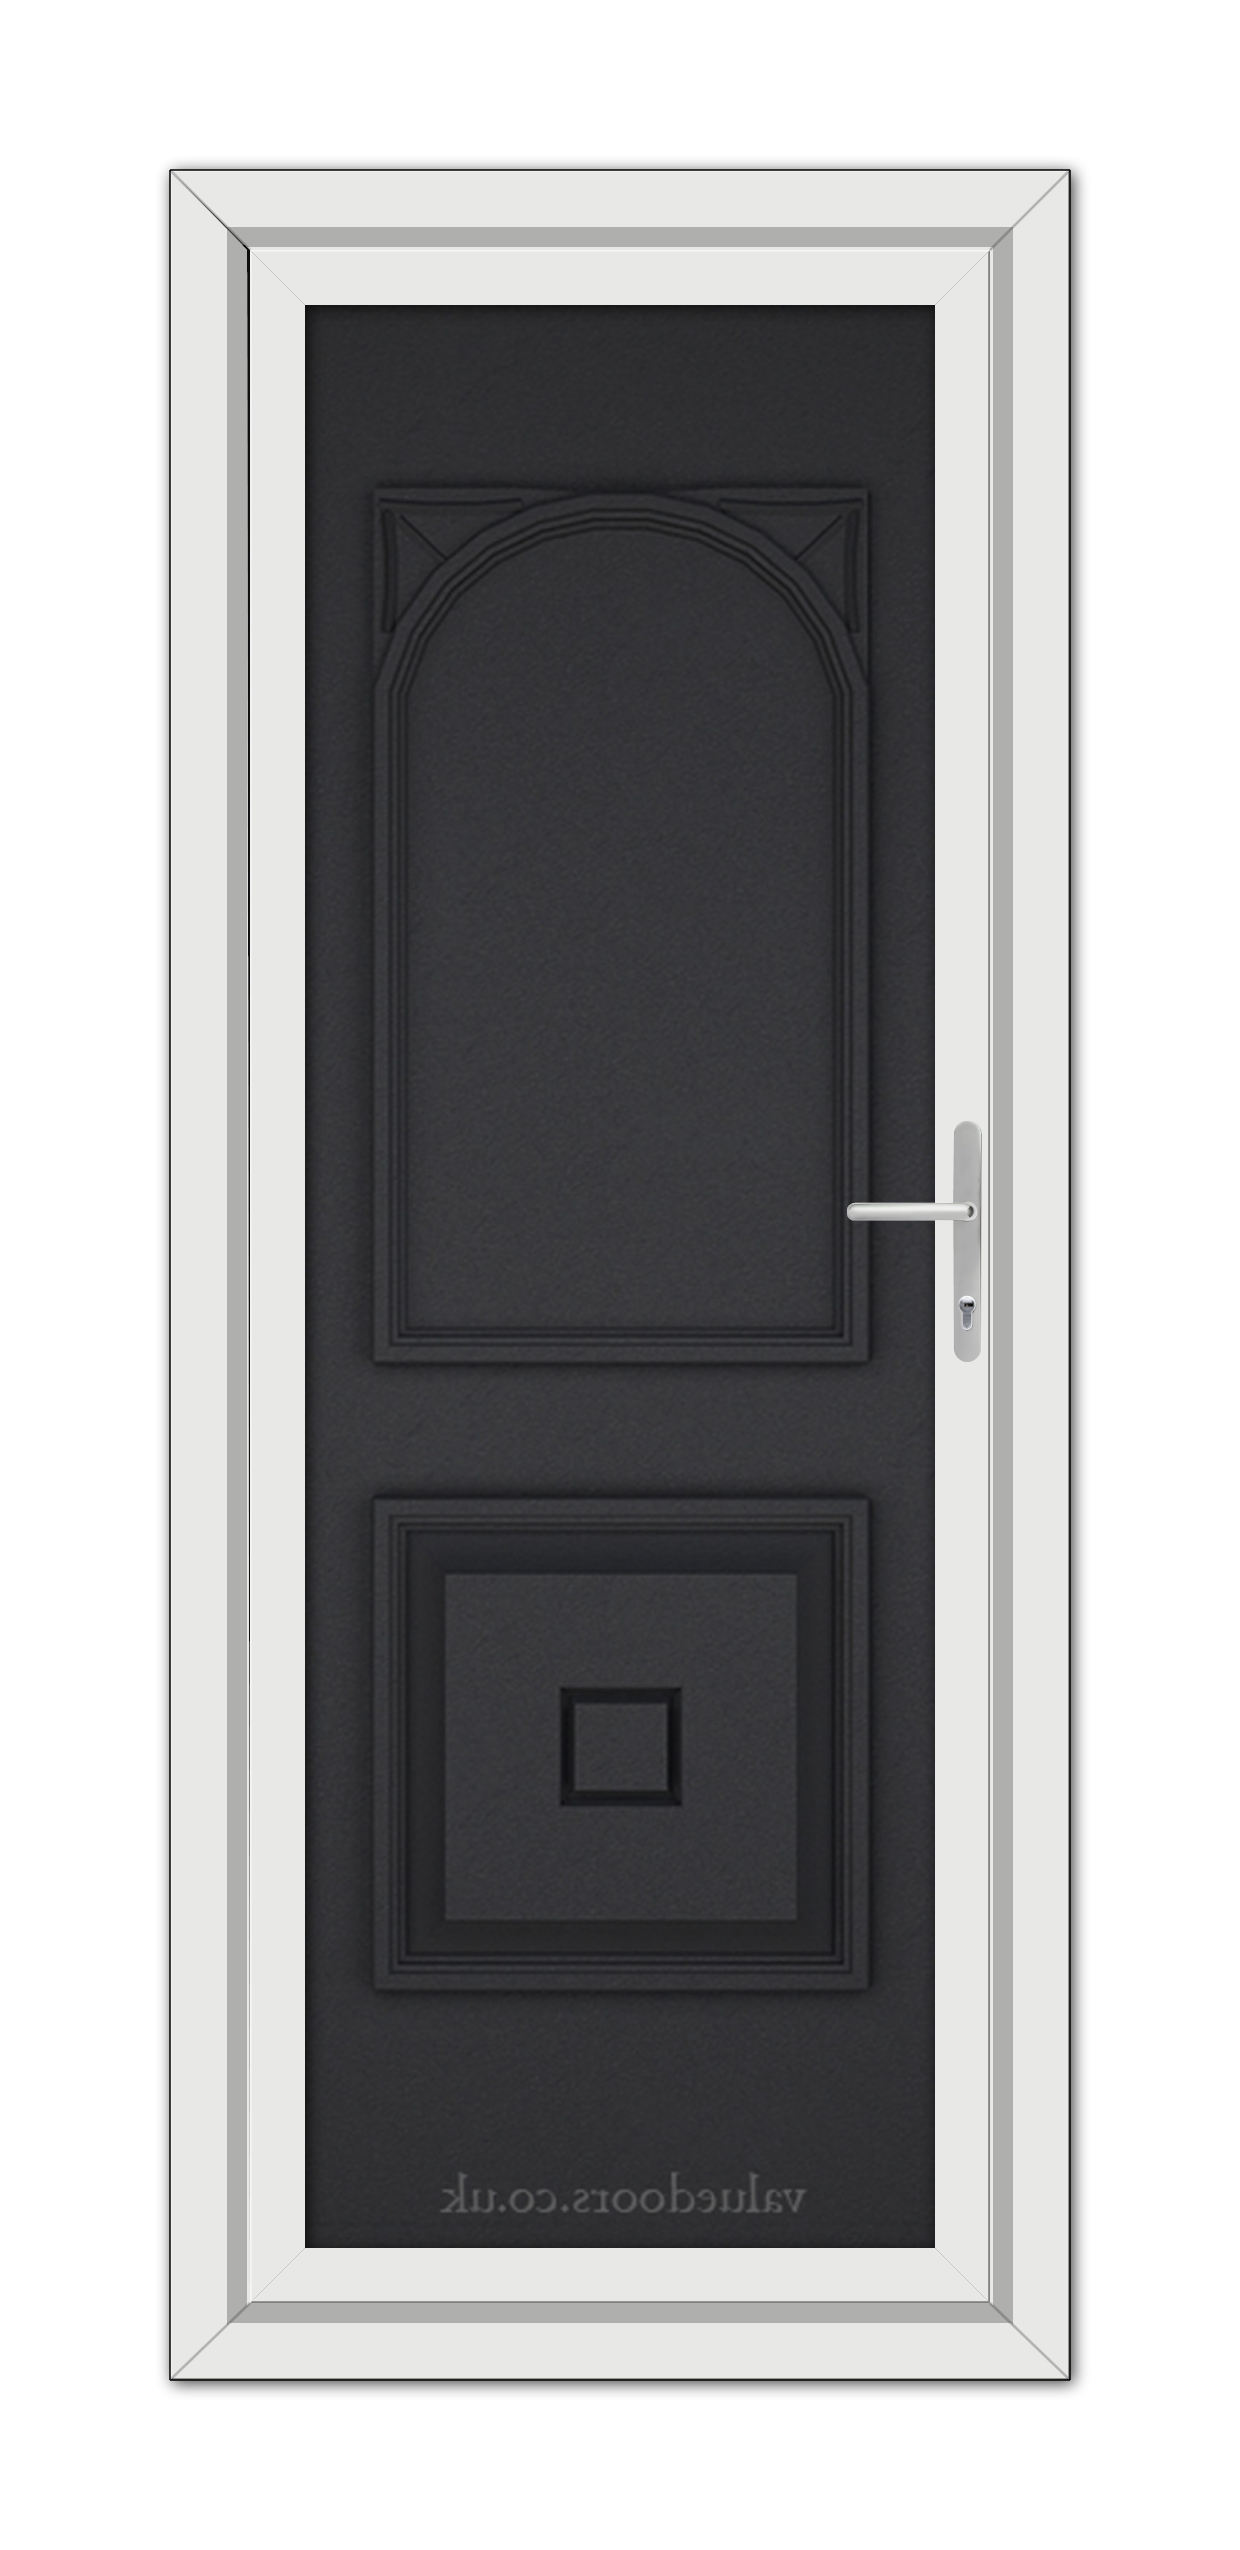 A vertical image of a closed, Dark Reims Solid uPVC Door with a silver handle, set within a white frame, viewed from the front.